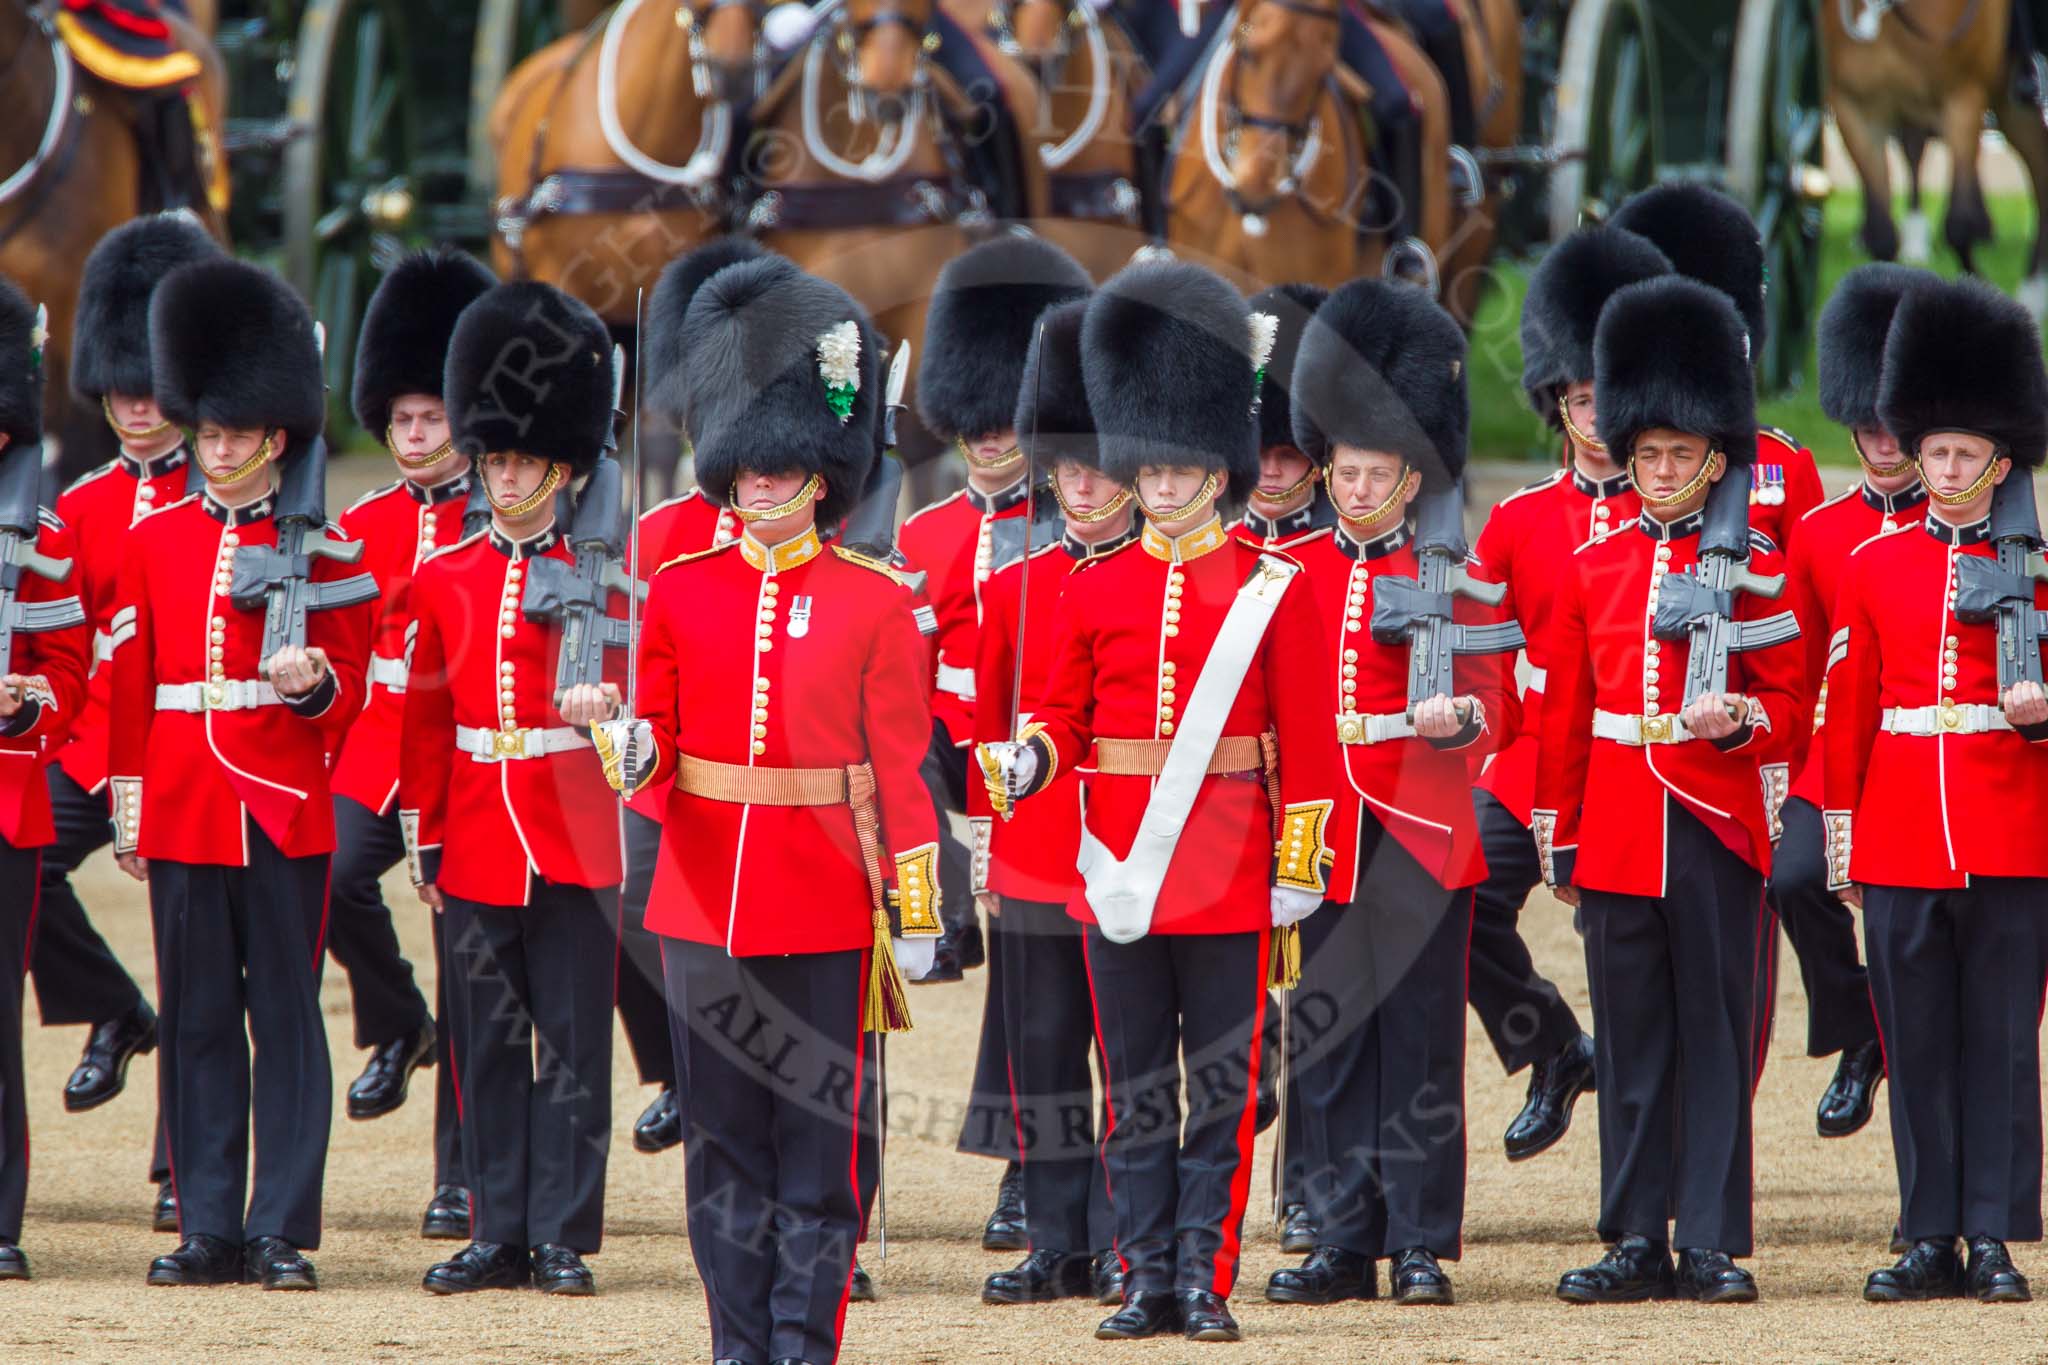 The Colonel's Review 2013: Captain F O Lloyd-George gives the orders for No. 1 Guard (Escort for the Colour),1st Battalion Welsh Guards to move into close order..
Horse Guards Parade, Westminster,
London SW1,

United Kingdom,
on 08 June 2013 at 11:15, image #481